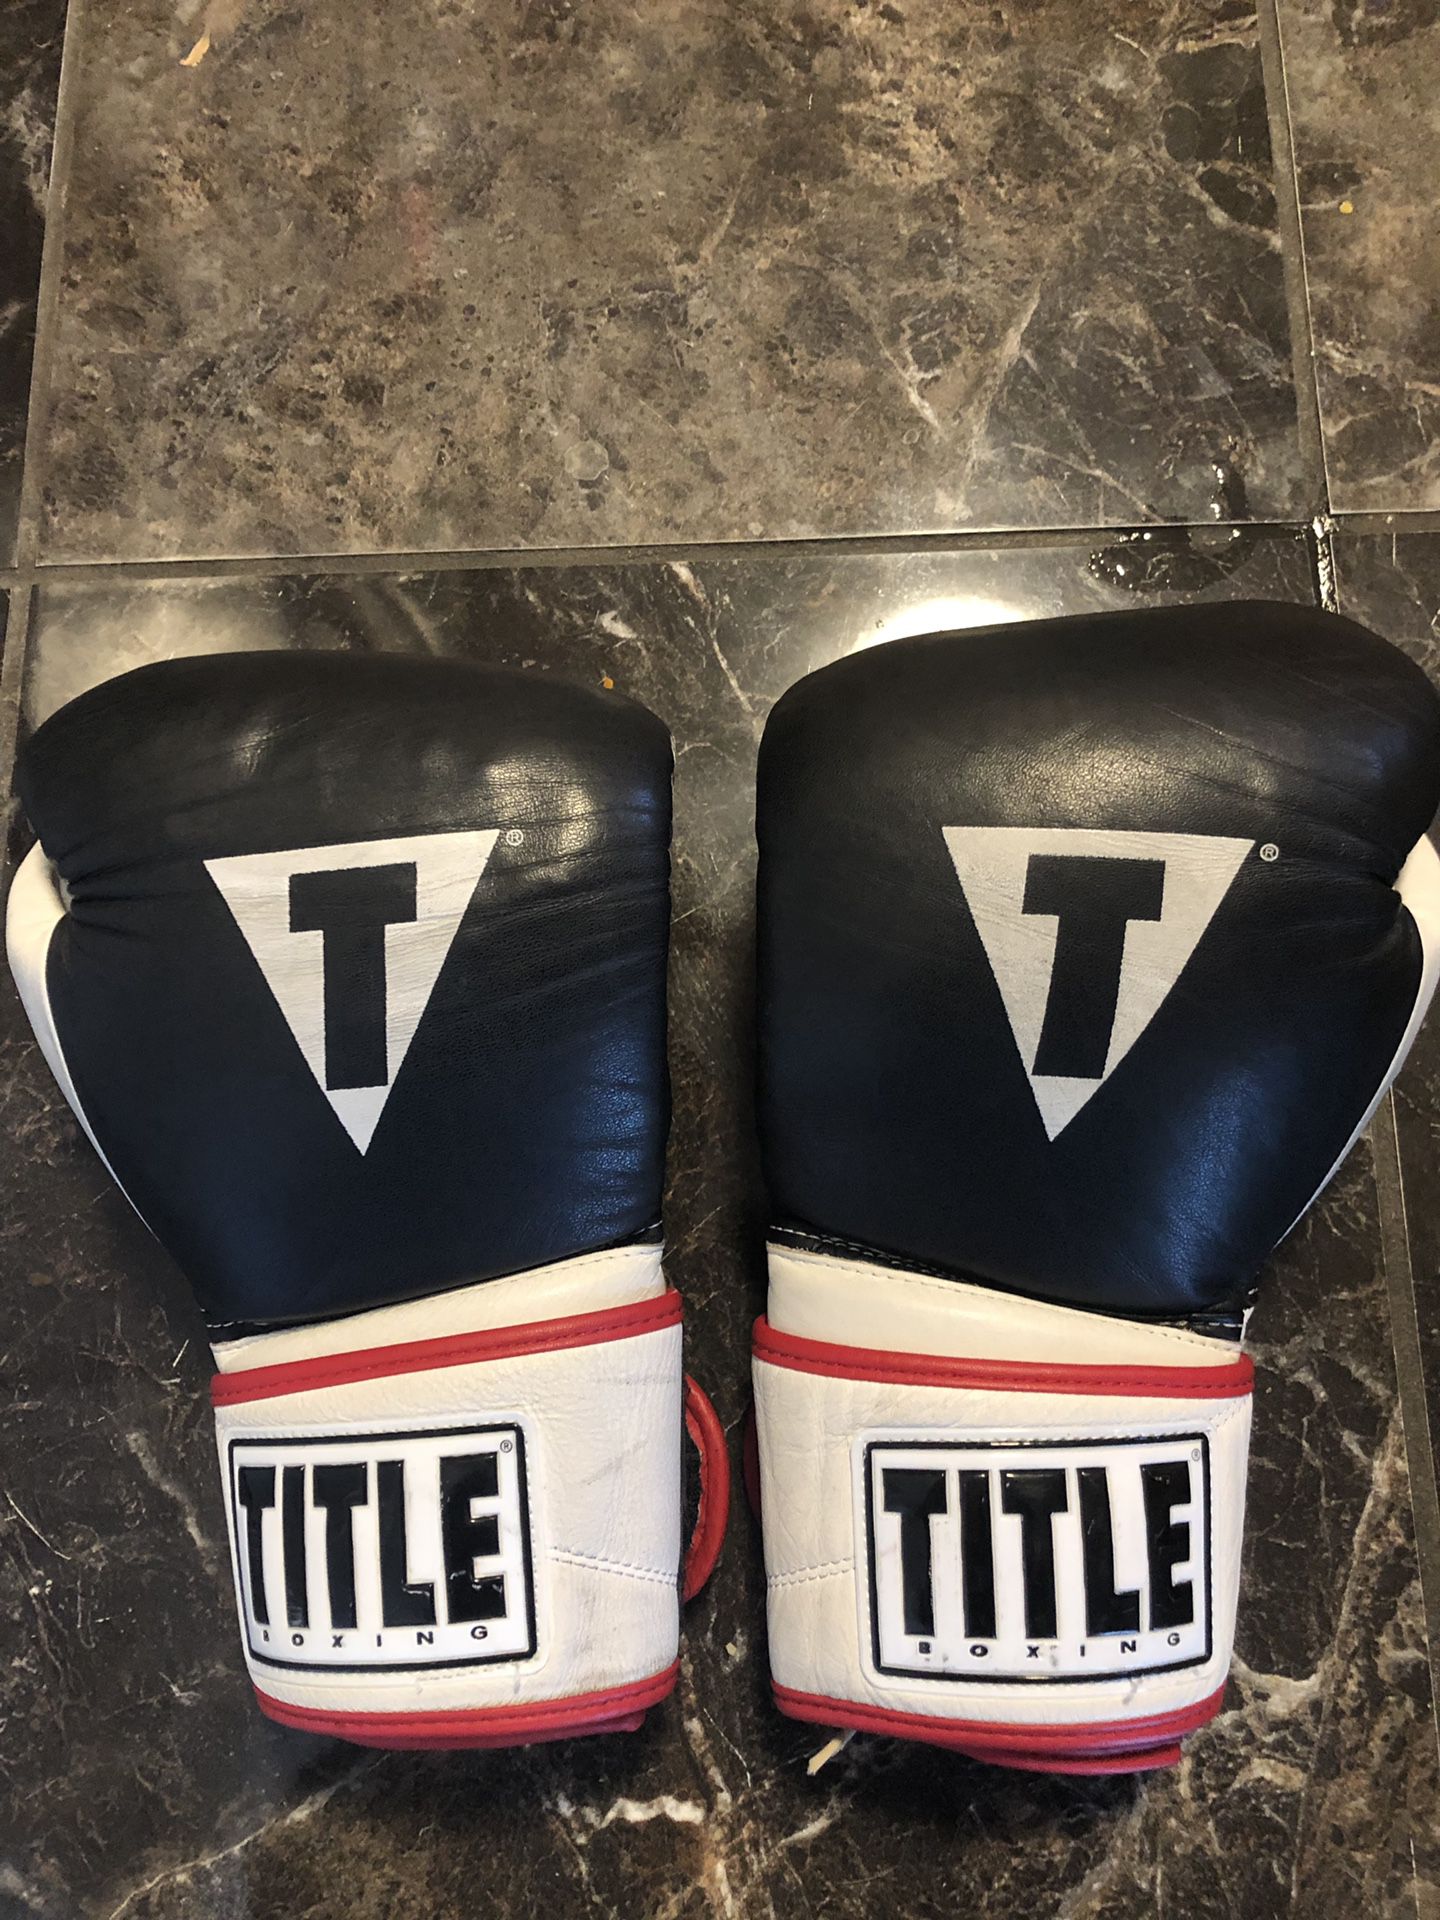 Title gel 16oz boxing gloves leather